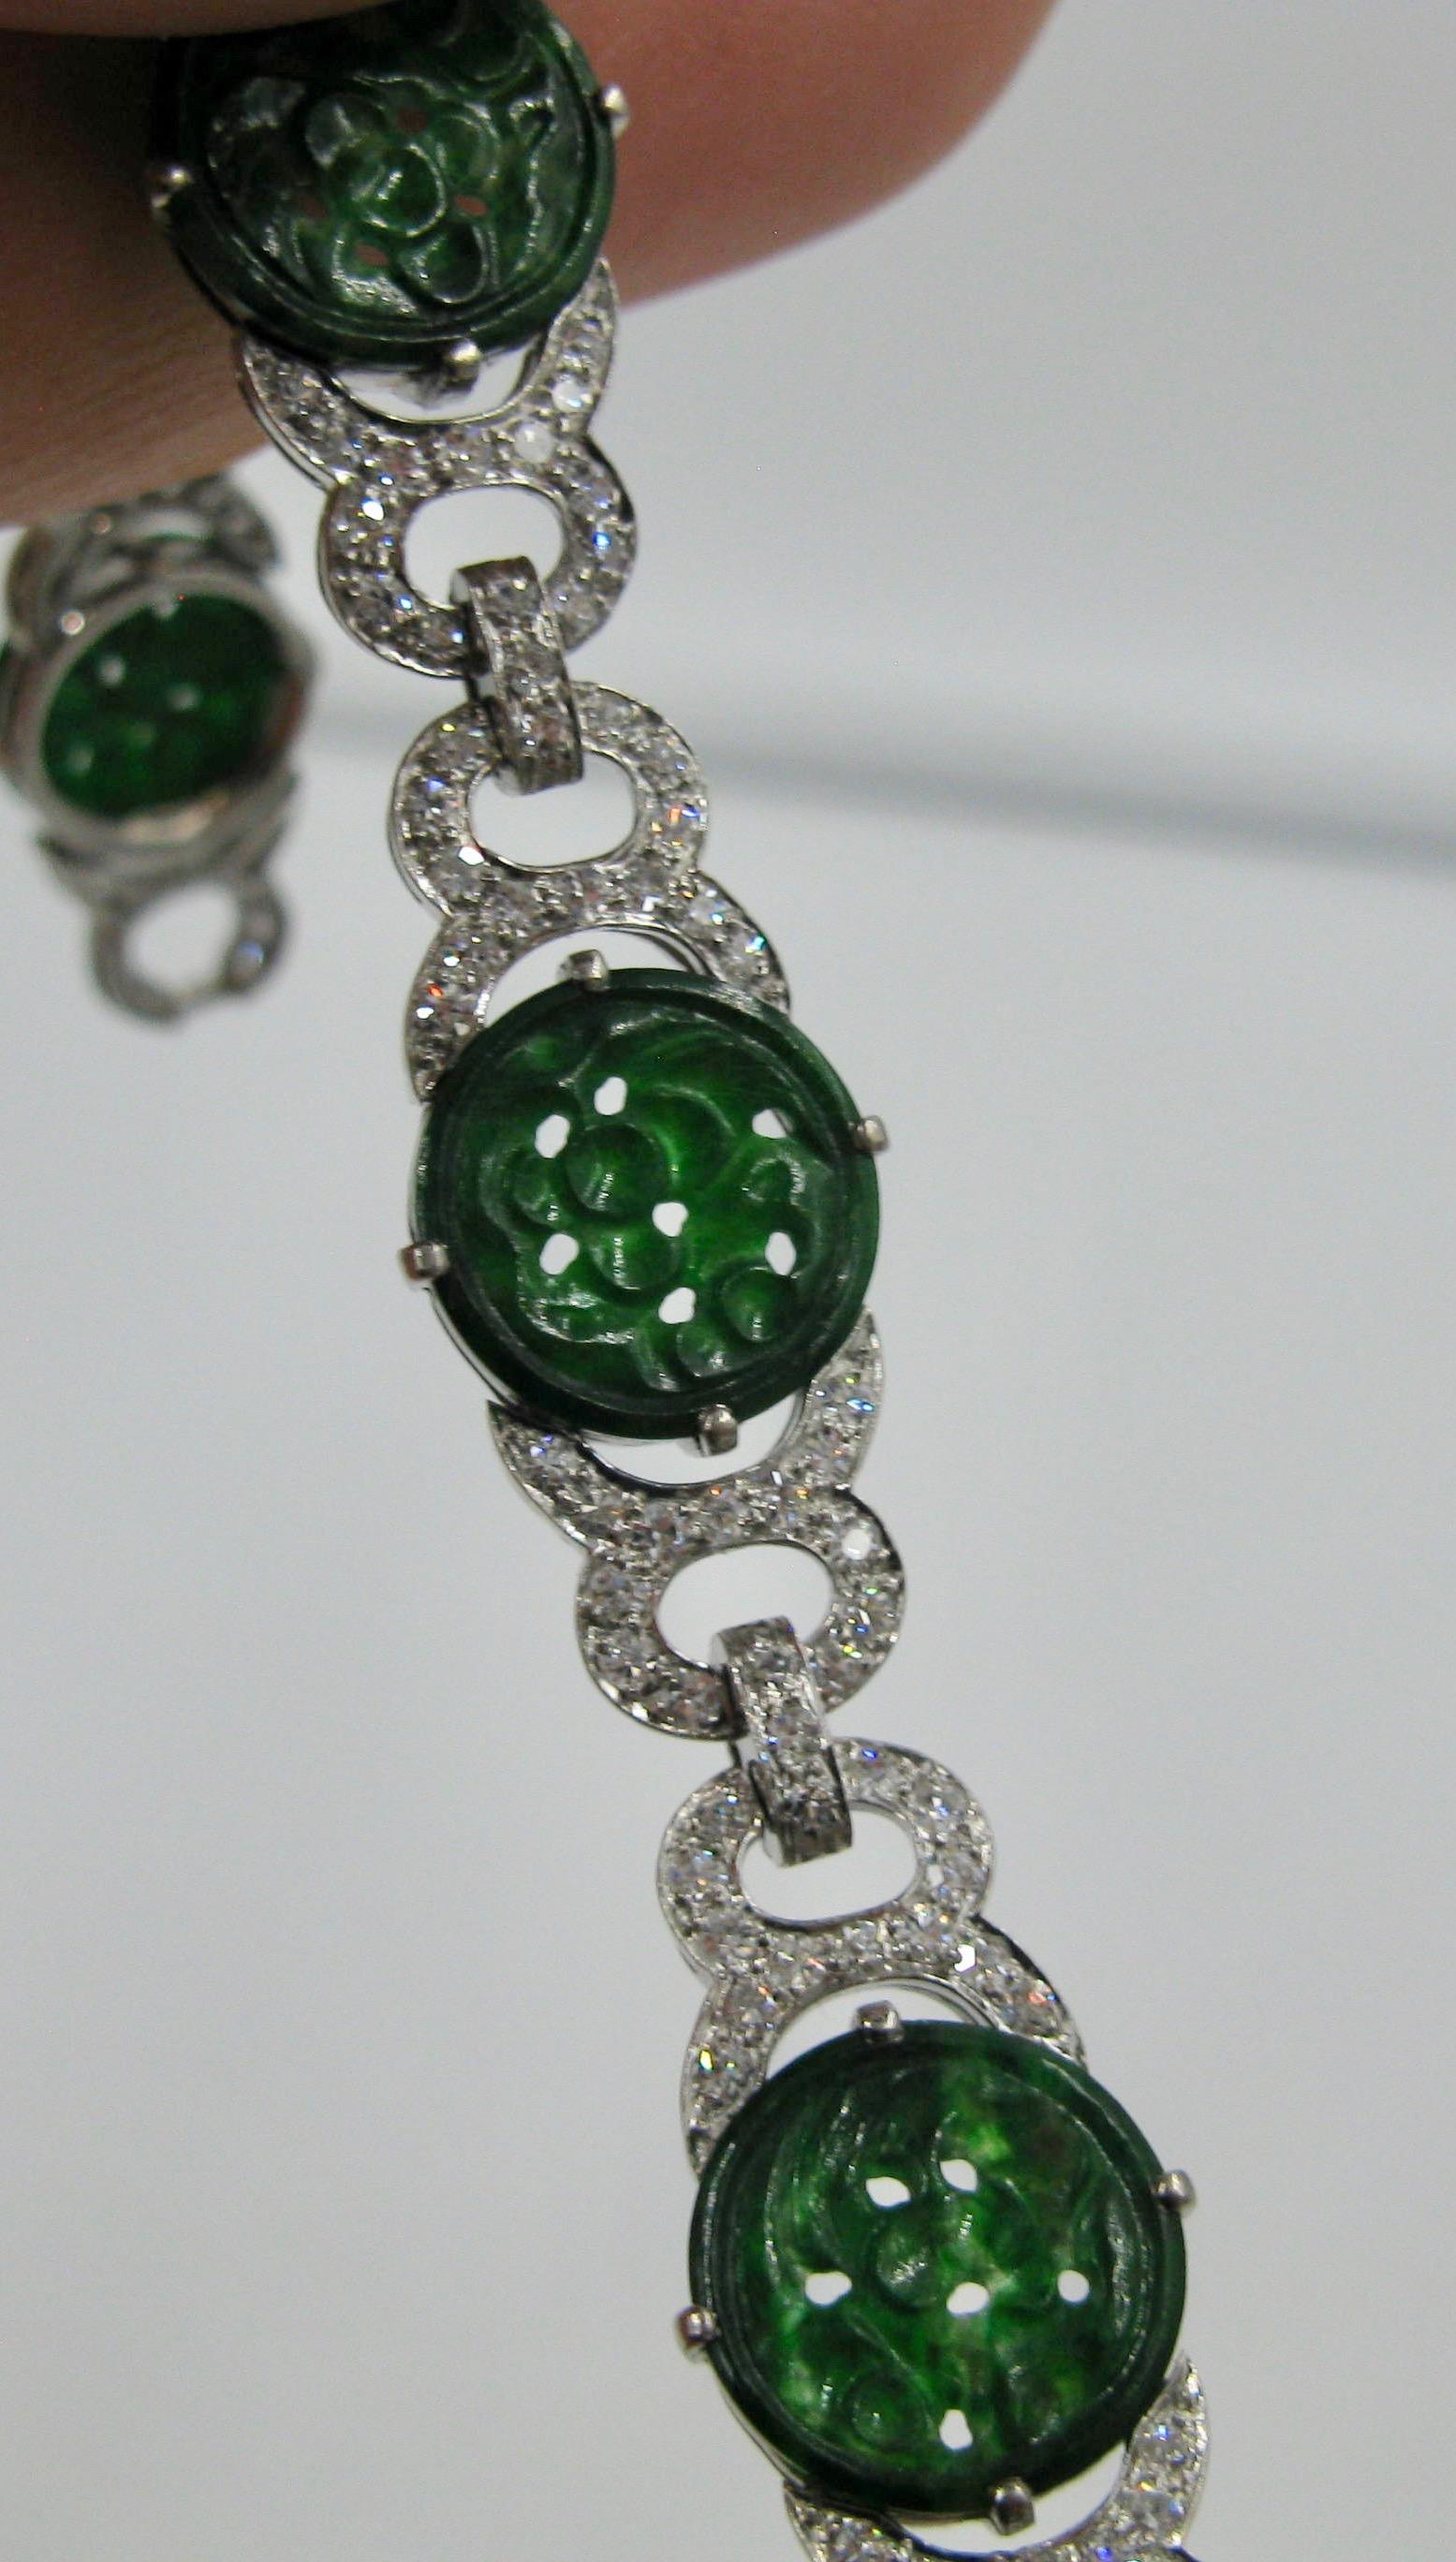 A spectacular bracelet with six round carved Jadeite medallions set with 174 sparkling white diamonds totaling 3.4 Carats.   The jewels are set in an open work Art Deco style link bracelet of Platinum over 18 Karat white gold!  This is one of the